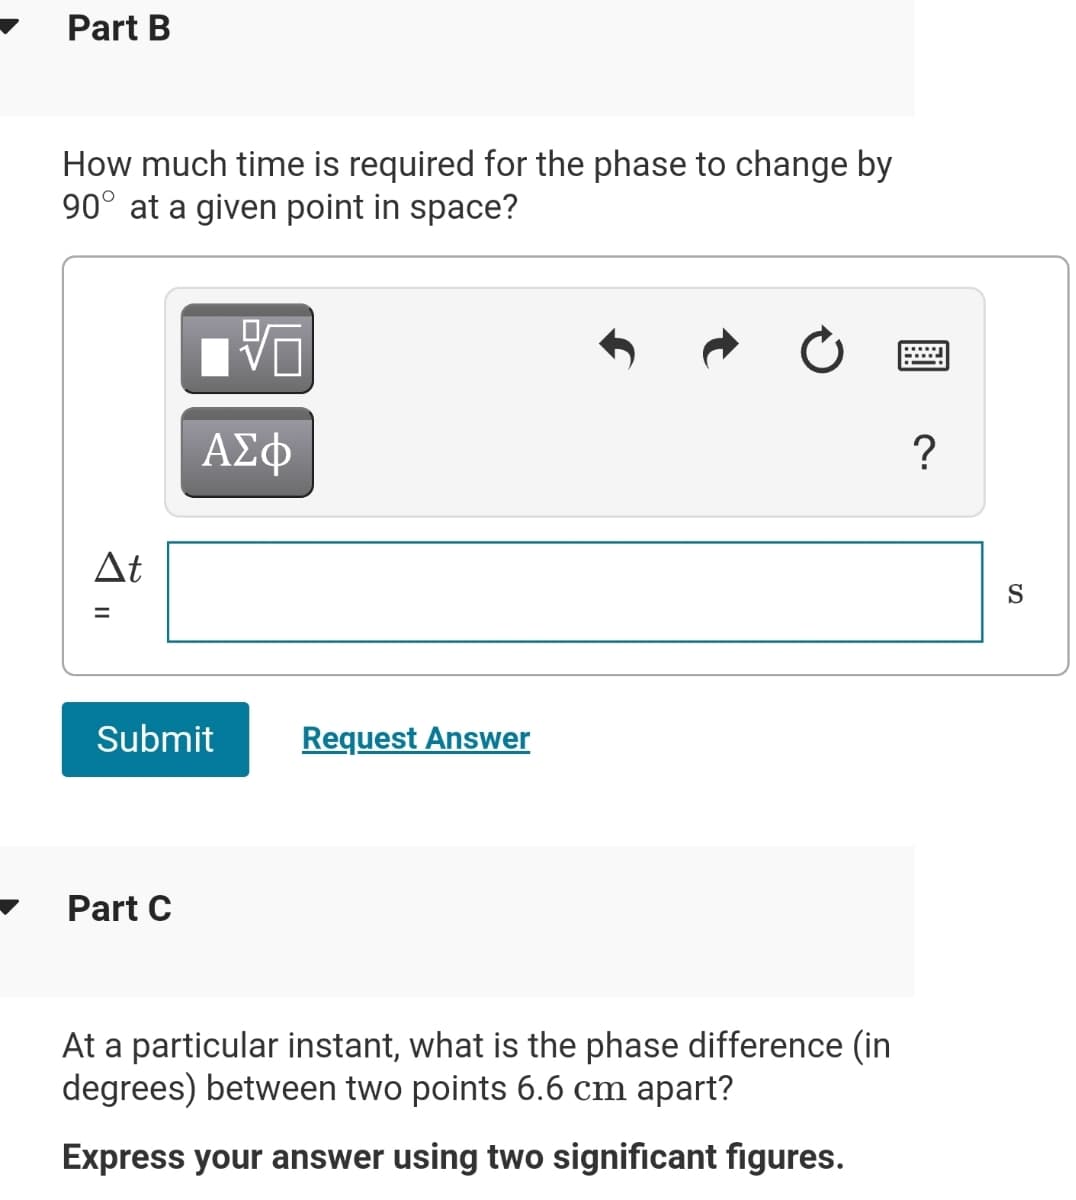 Part B
How much time is required for the phase to change by
90° at a given point in space?
At
S
Submit
Request Answer
Part C
At a particular instant, what is the phase difference (in
degrees) between two points 6.6 cm apart?
Express your answer using two significant figures.
